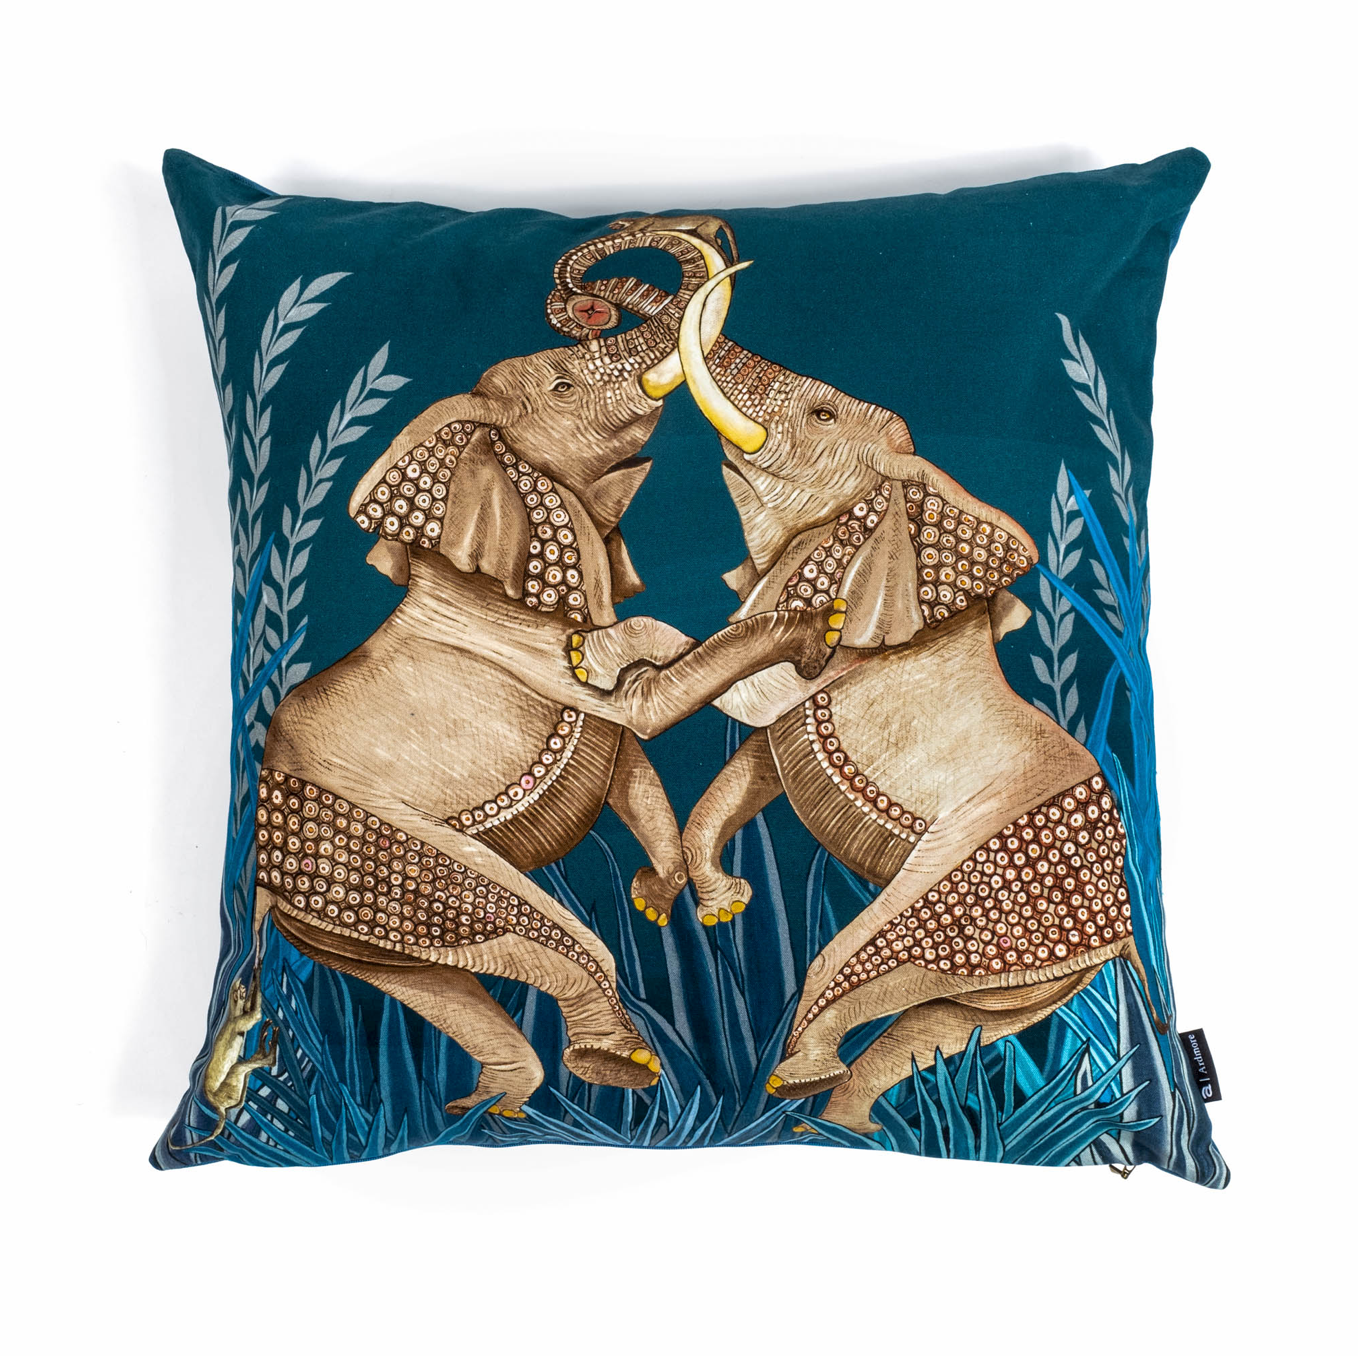 Ardmore Dancing Elephants cotton pillows from South Africa